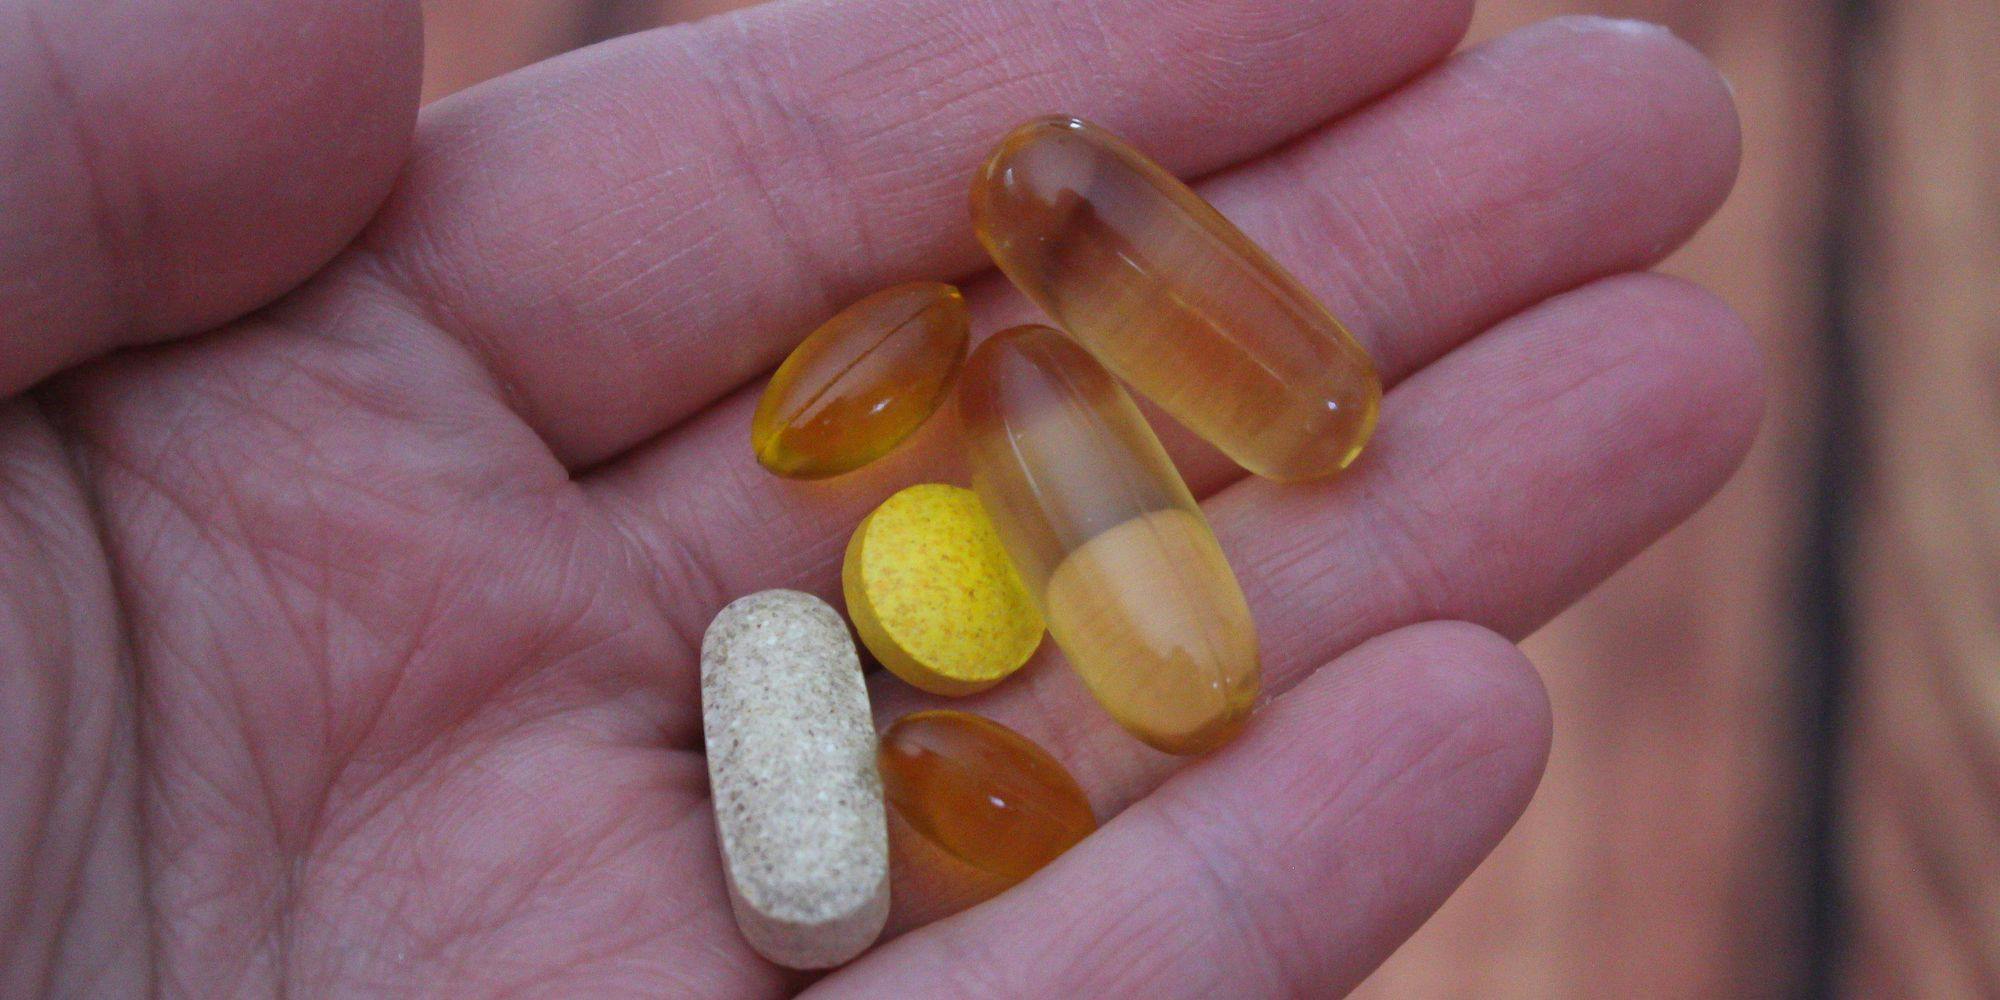 Cover Image for "Are multivitamins and supplements necessary?"